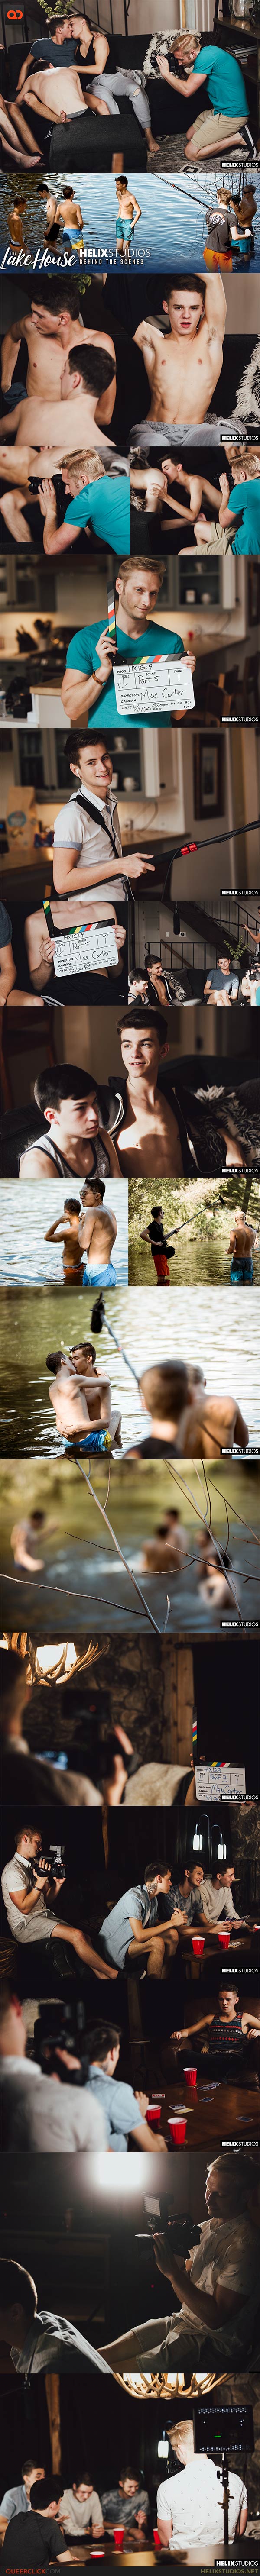 Helix Studios: The Lake House: Behind the Scenes